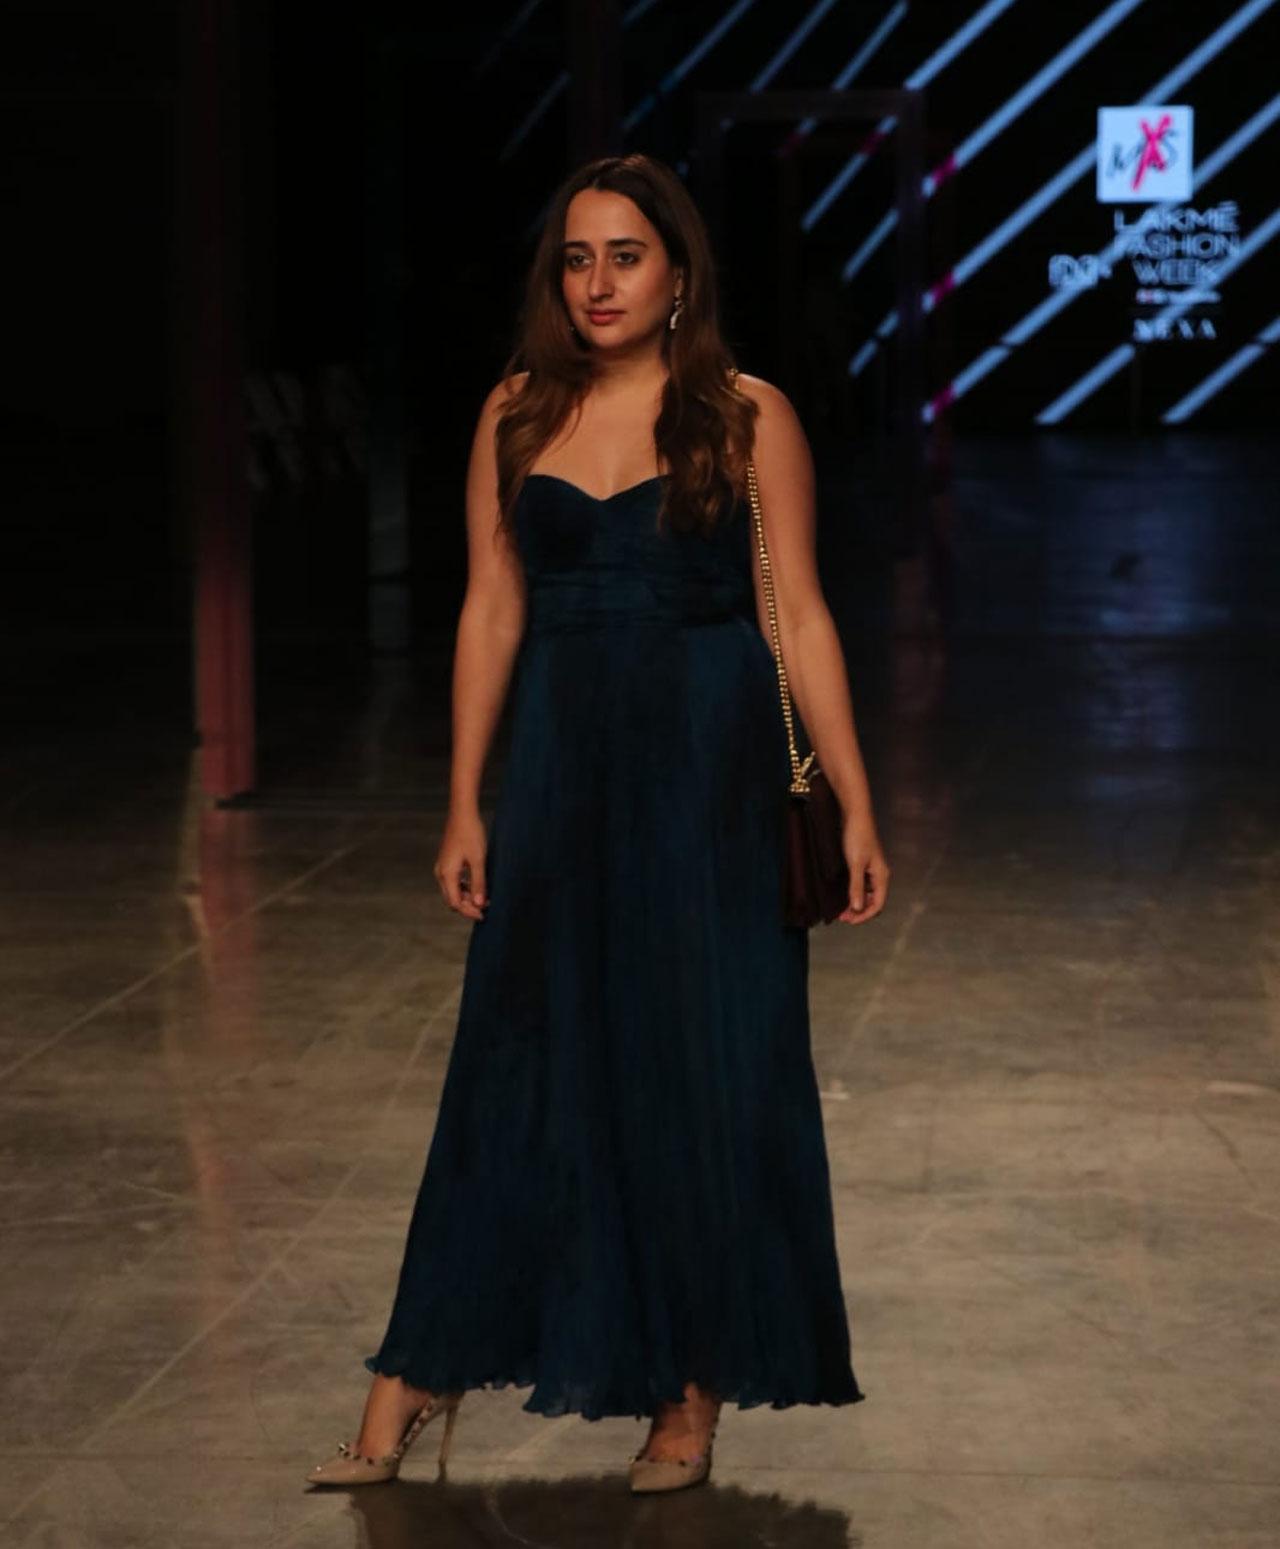 Varun Dhawan's wife Natasha Dalal kept it simple yet stylish at the first day of 2021's Lakme Fashion Week. Dhawan and Dalal donated Rs 1 lakh towards the relief of fire victims in Tirap and Longding districts of Arunachal Pradesh earlier this year.